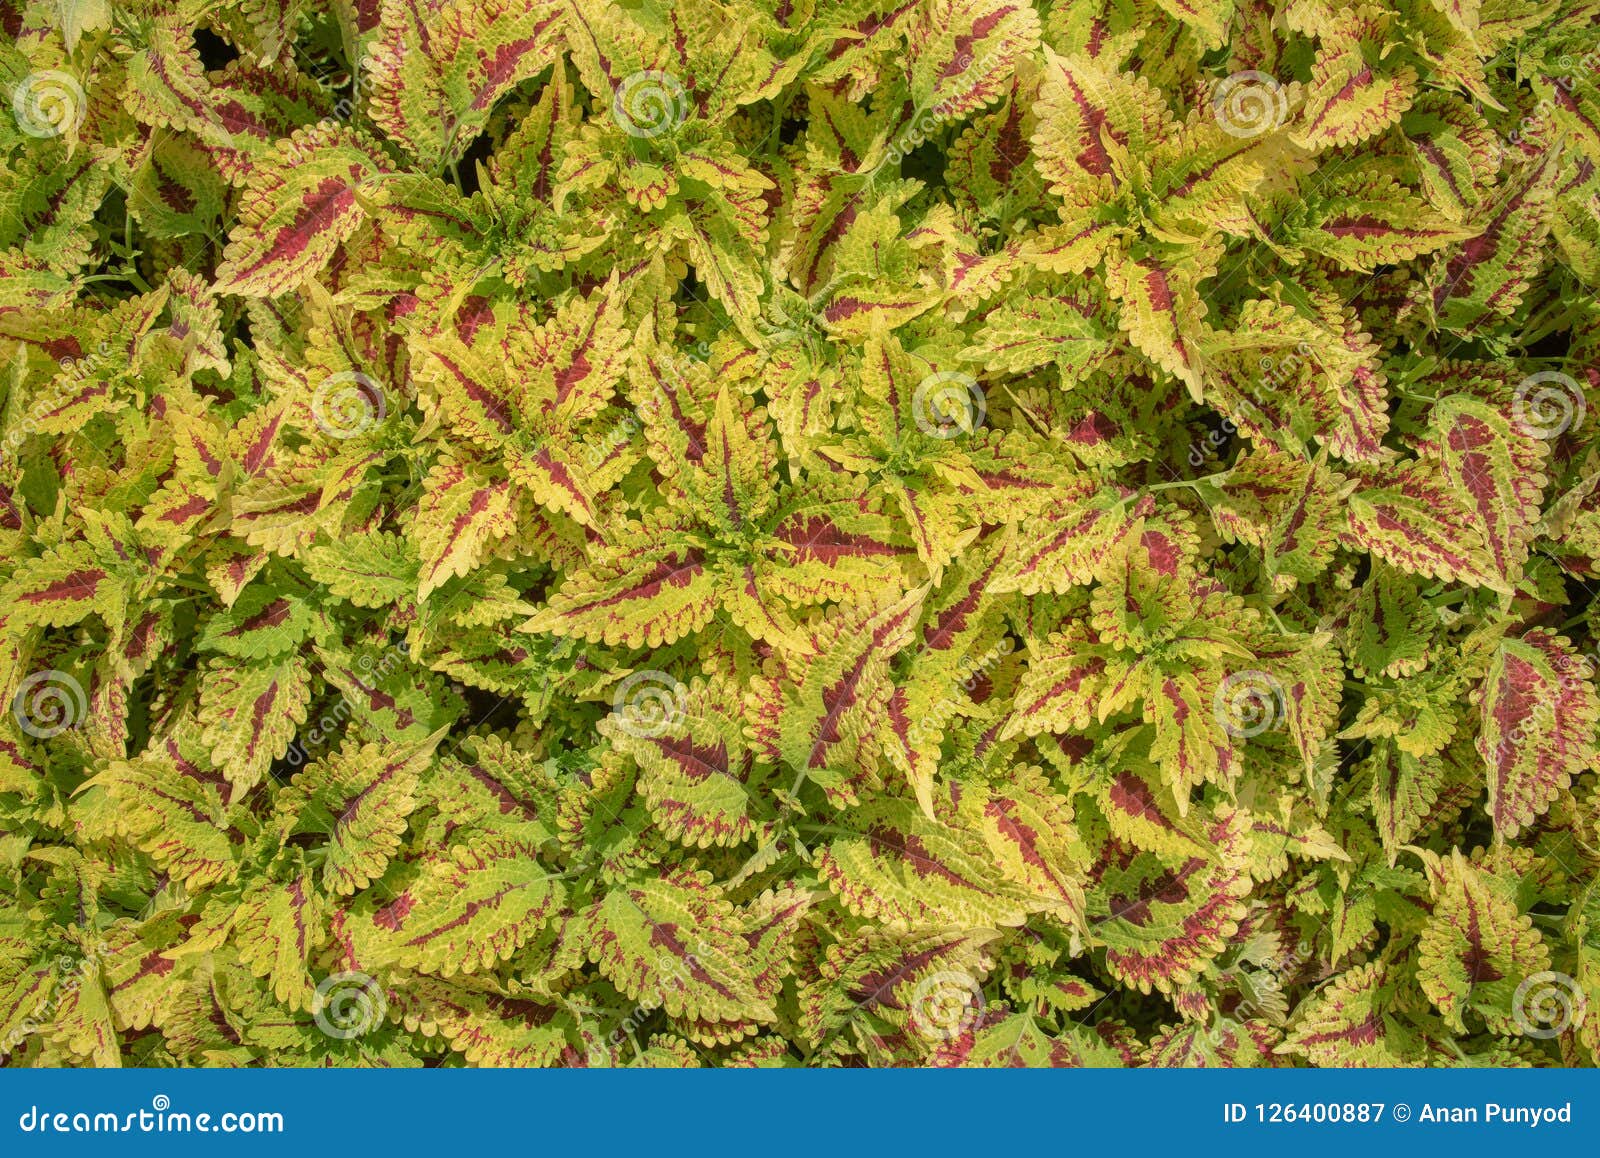 green and red perilla planta for texture and background